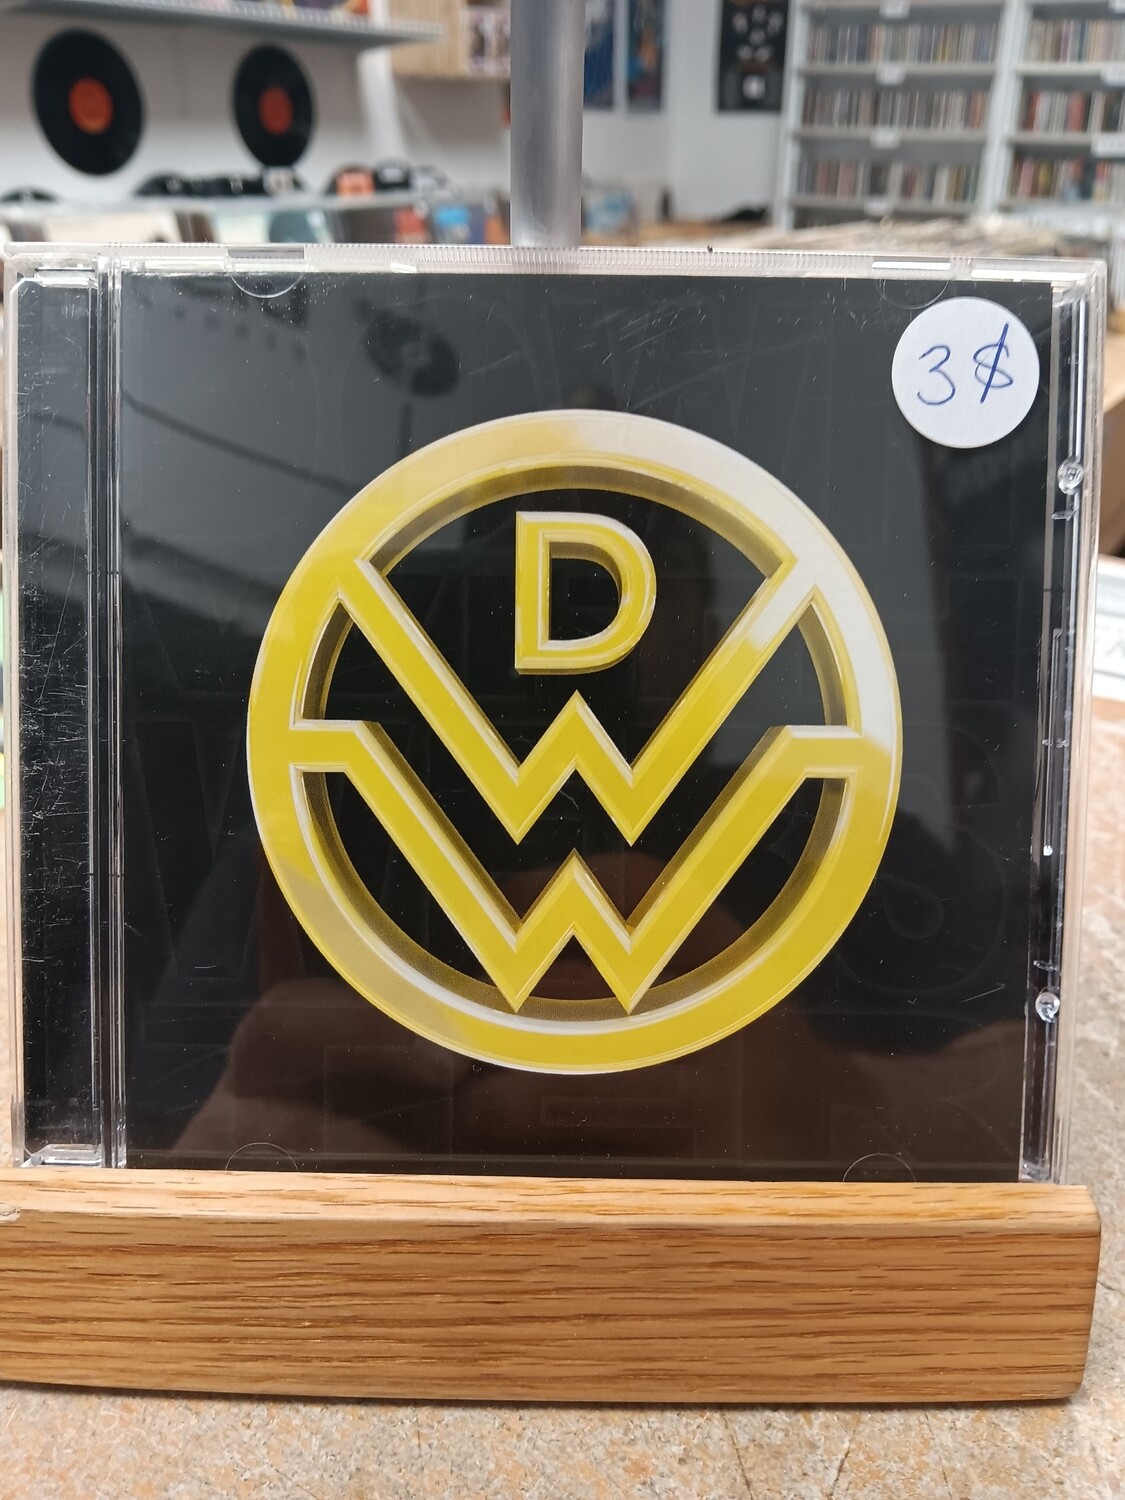 Down with webster - Time to win (CD)